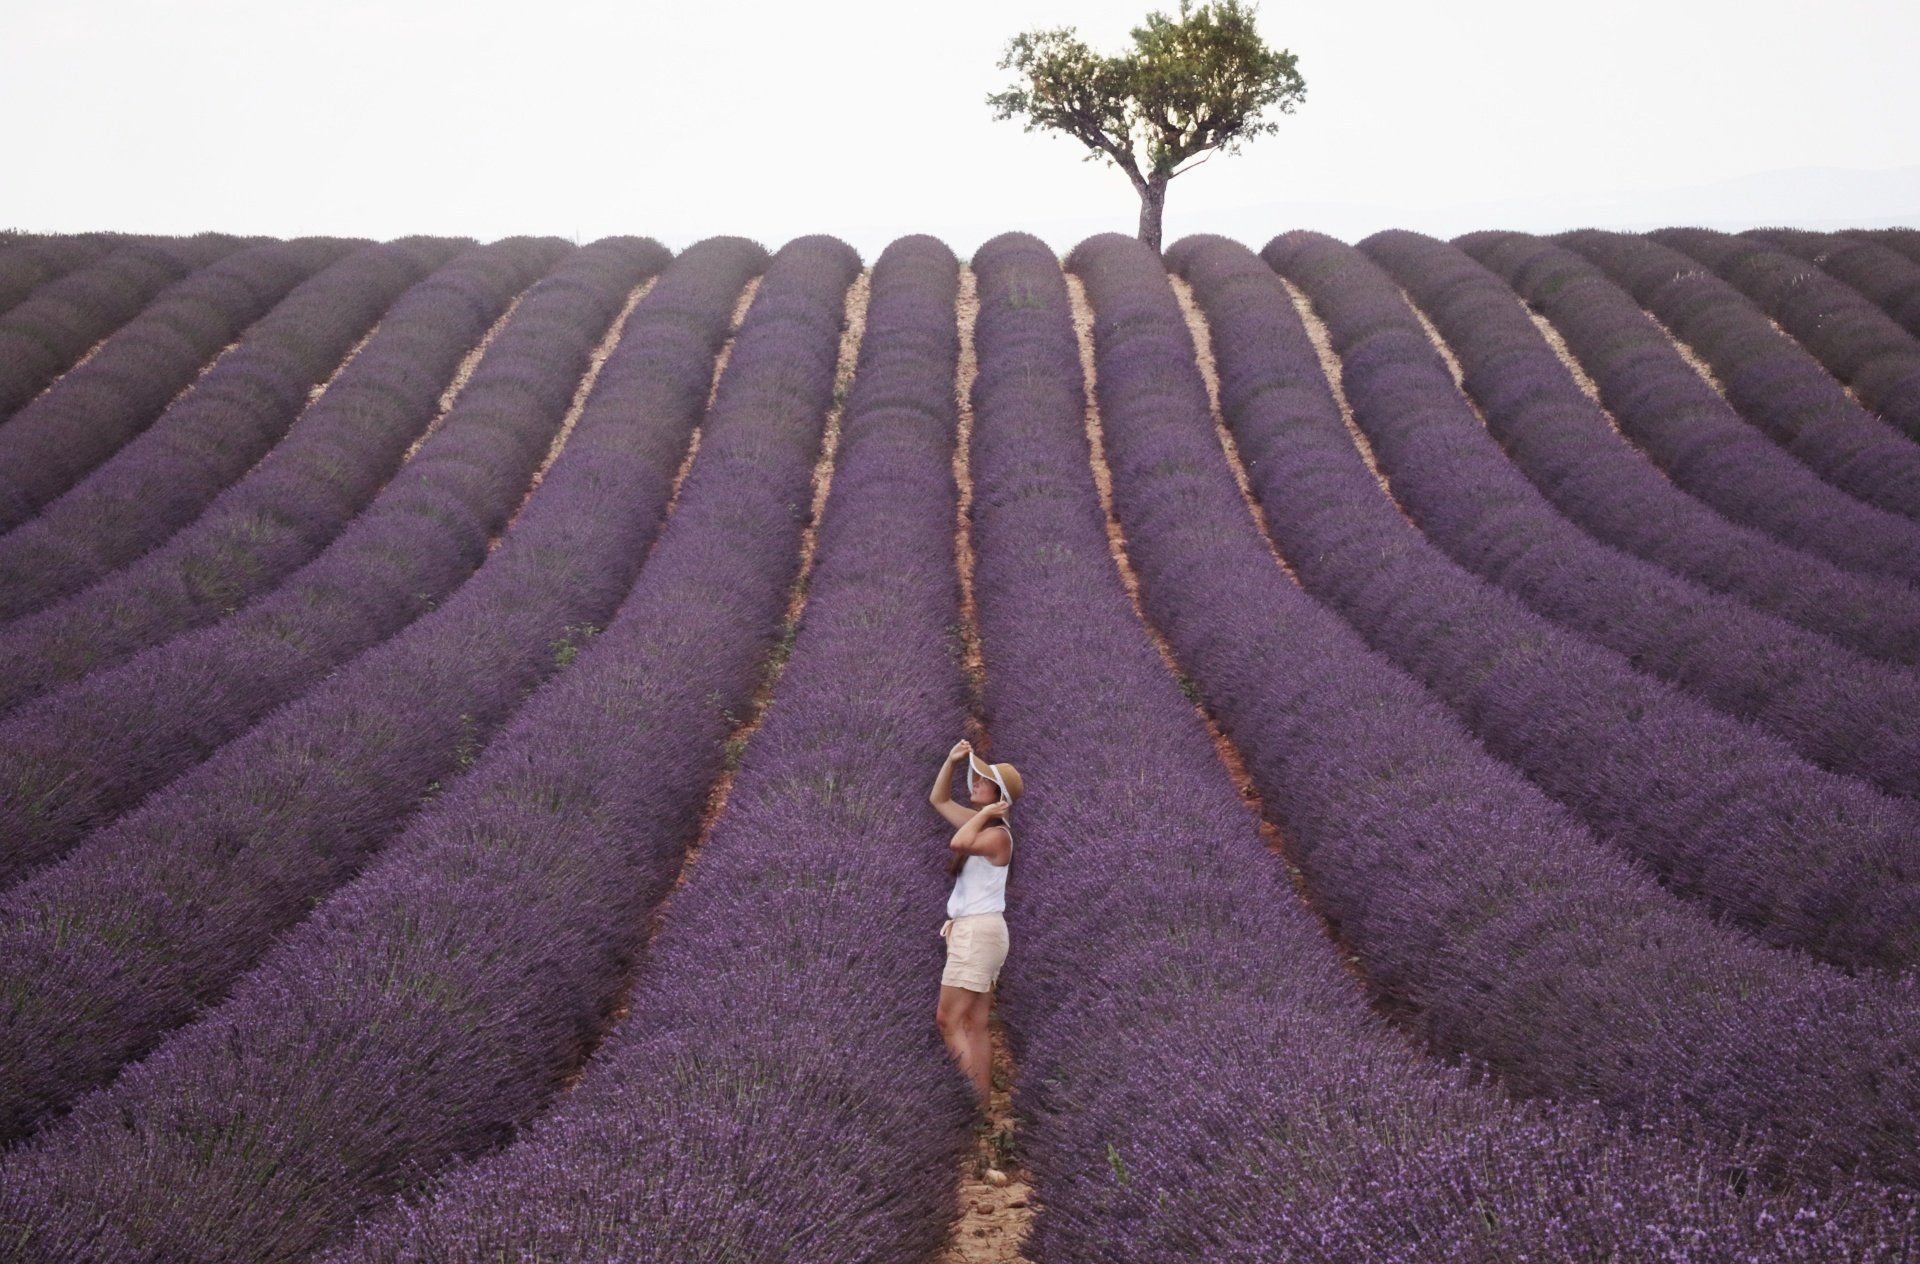 A woman is standing in a lavender field with a tree in the background.